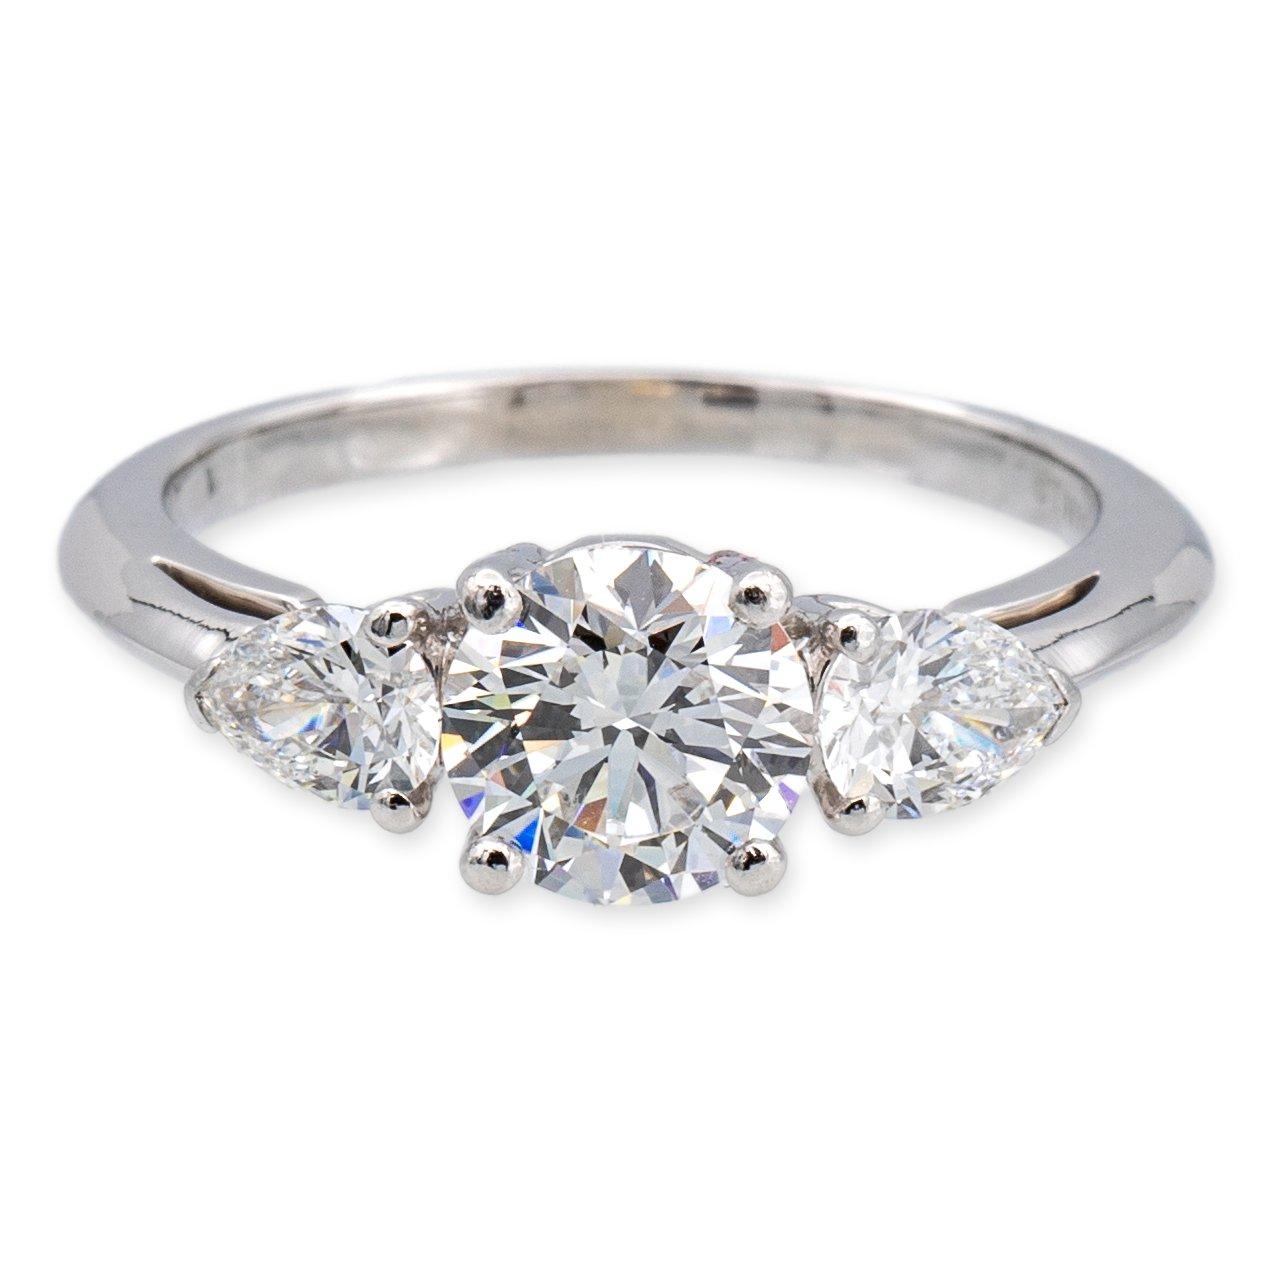 Tiffany & Co. classic three stone engagement ring finely crafted in platinum featuring one round brilliant cut diamond center and two pear shaped side stones set in an open gallery design. The center diamond weighs 1.06 carats , very fine E color